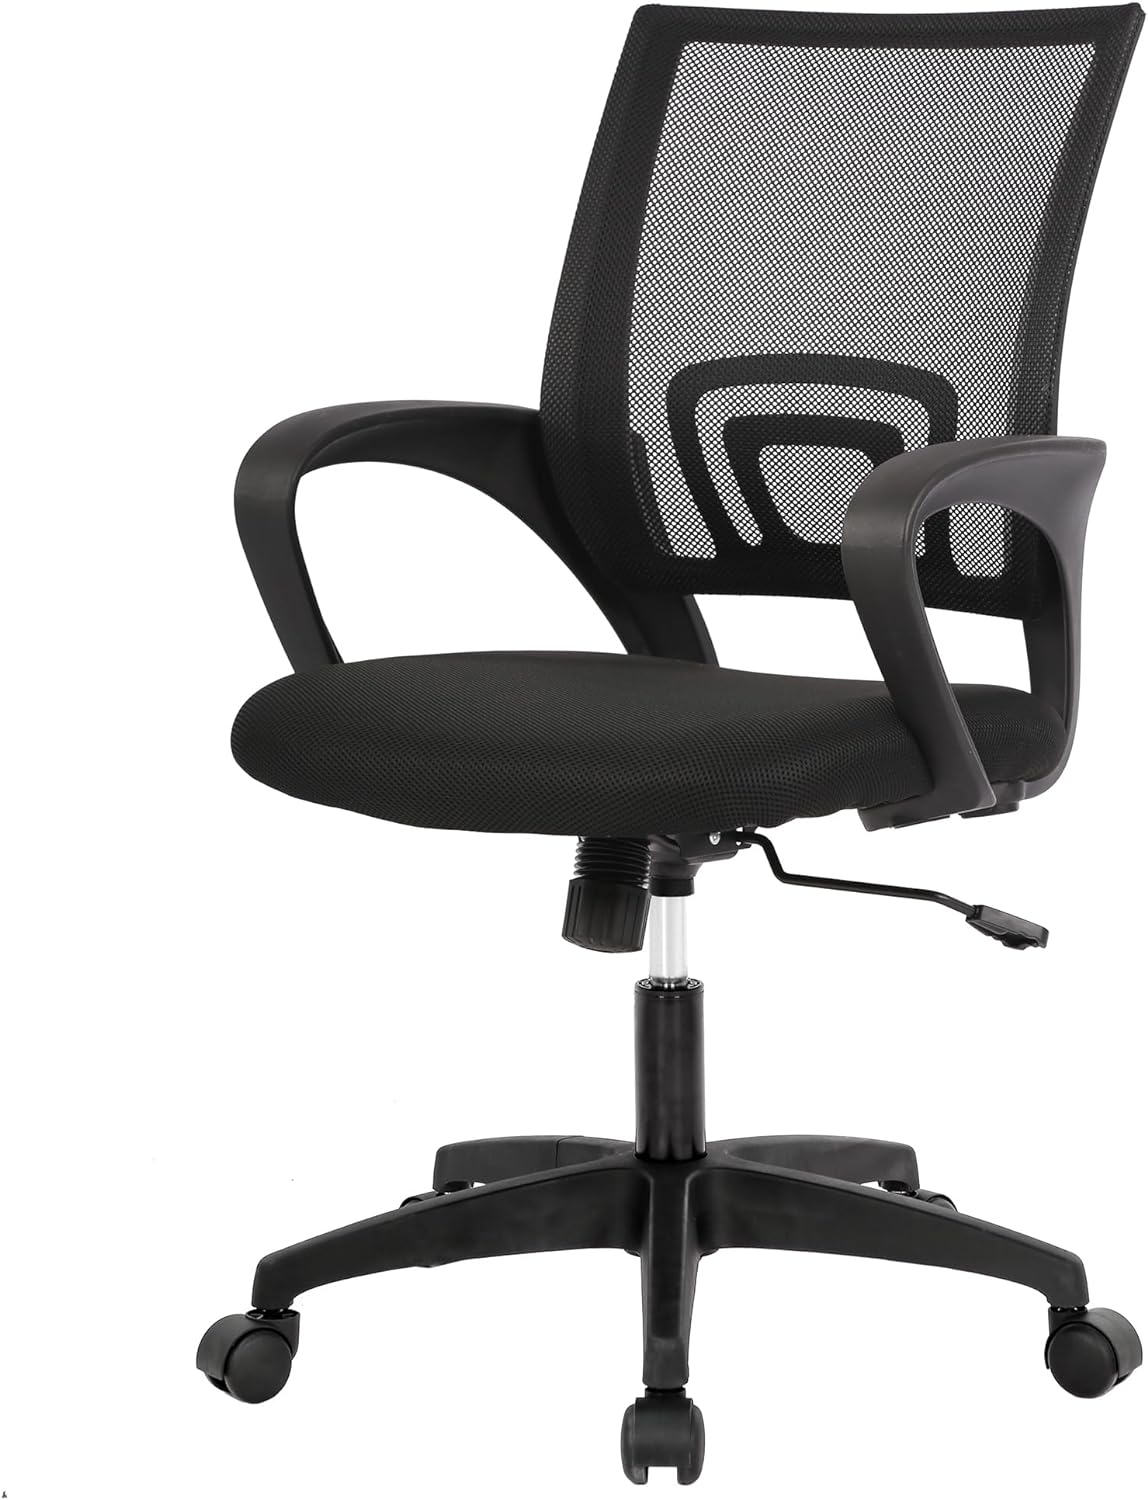 BestOffice Executive Chair with Lumbar Support & Swivel, 250 lb. Capacity, Black - image 1 of 7